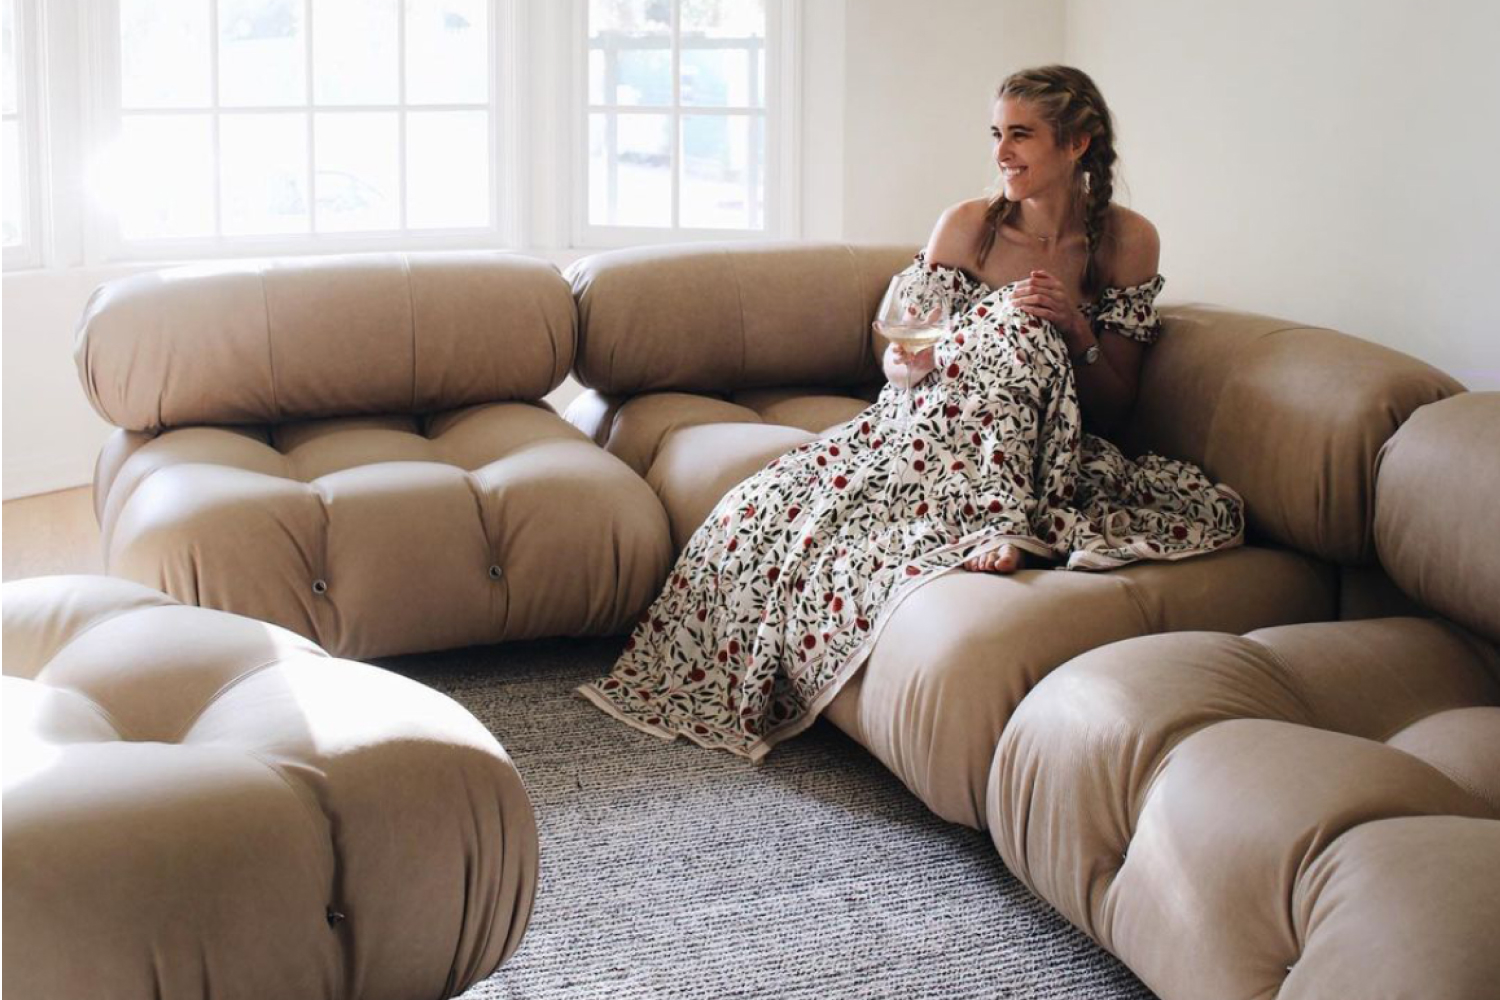 A smiling woman in a floral dress is seated on Mario Bellini modular sofa, holding a glass of wine. The room is bright with natural light, highlighting the sofa's unique design and the cozy textured grey rug beneath.